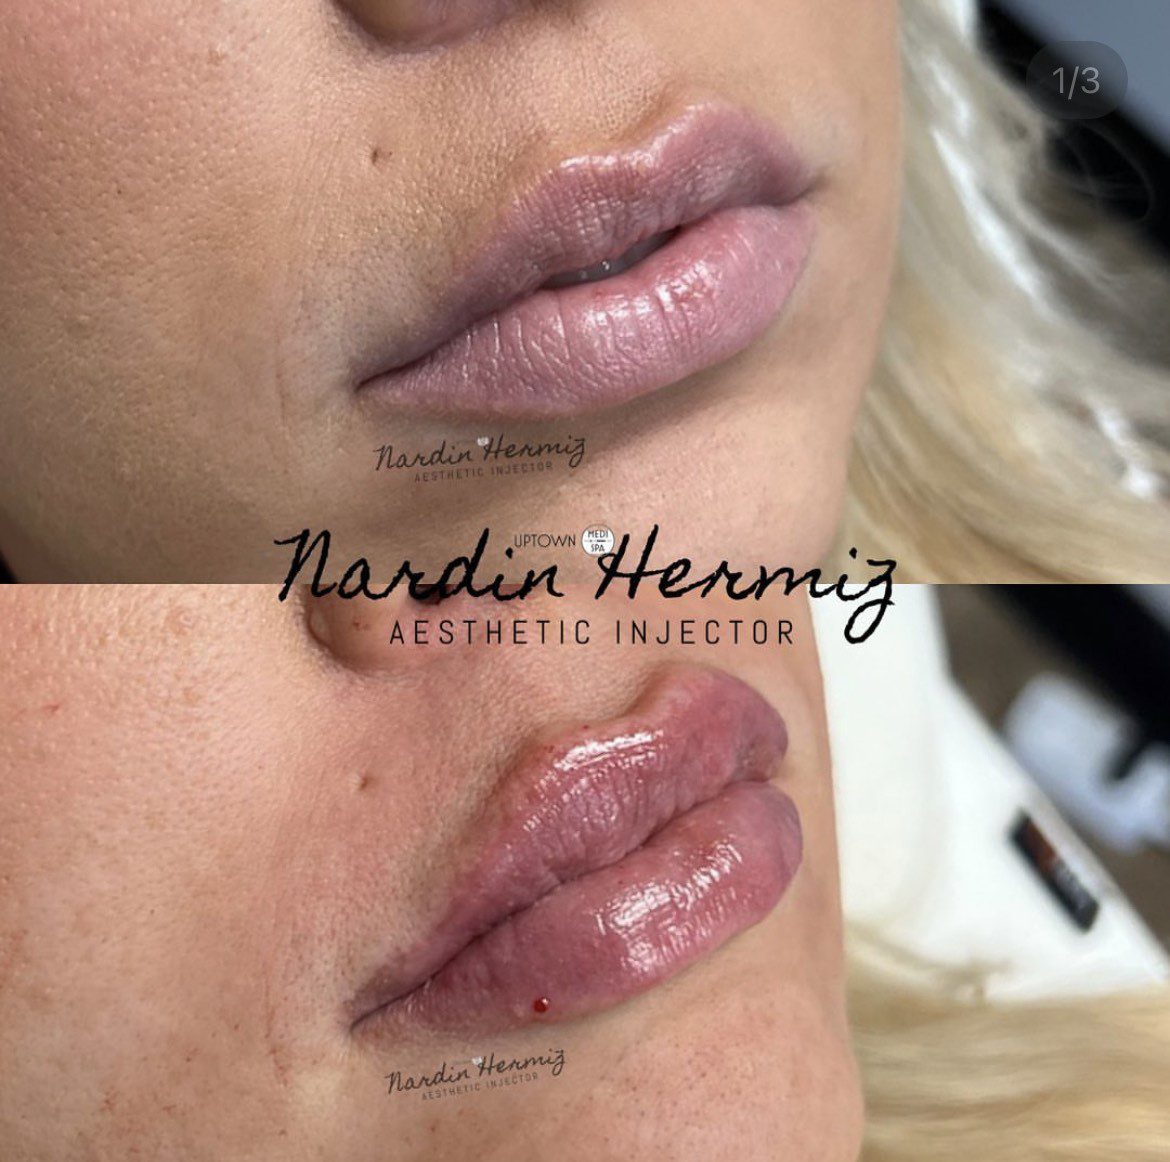 Lip Fillers Gone Wrong Or A Dream Gone Sour? — Get The Insight